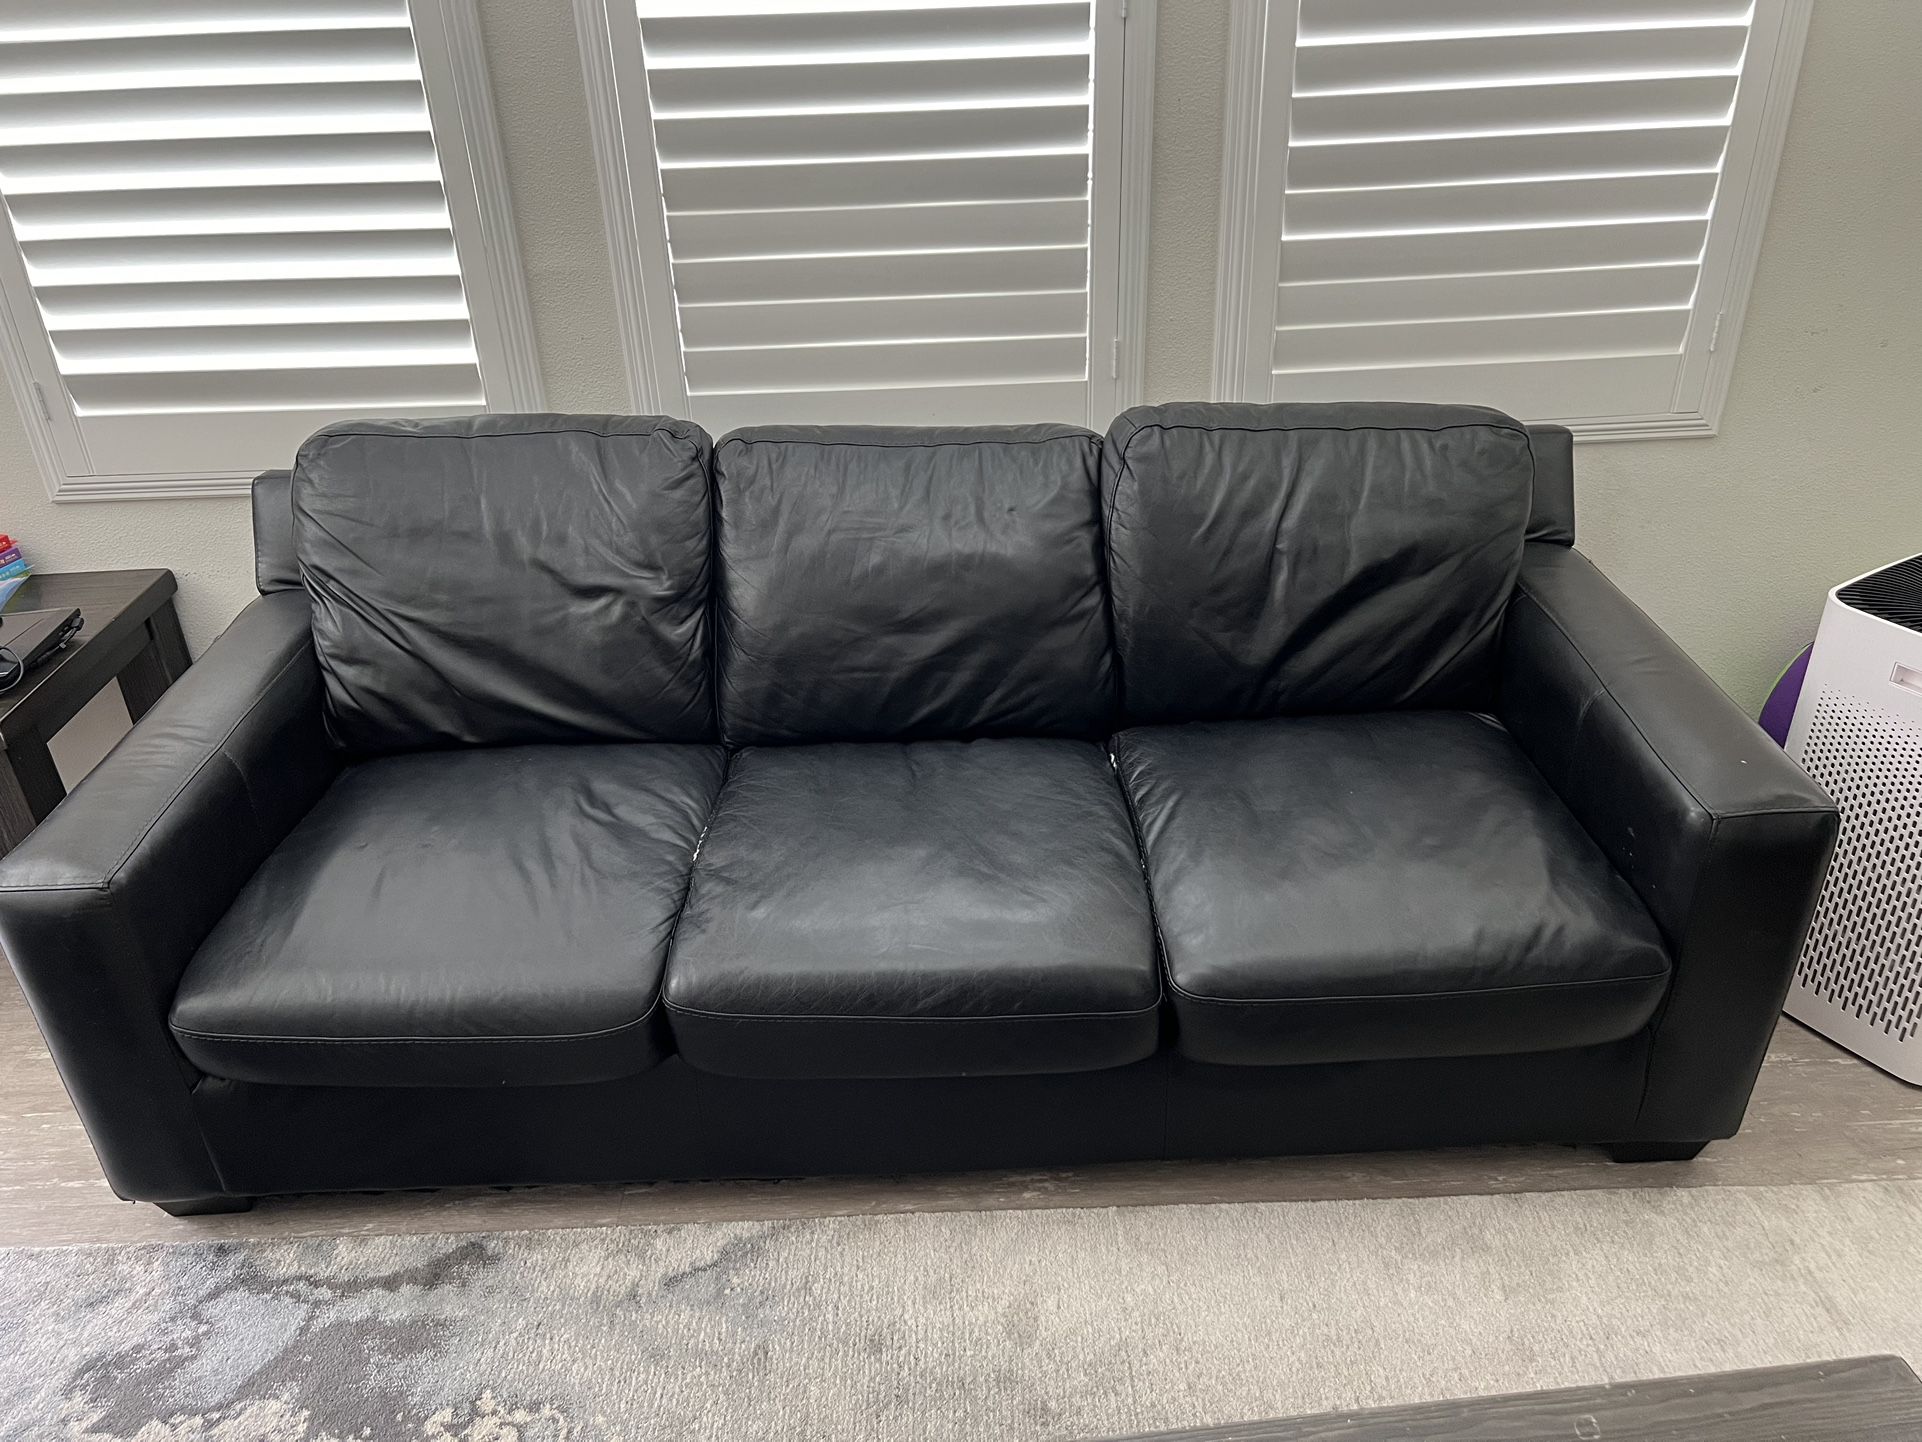 FREE! - 3 seat couch + loveseat